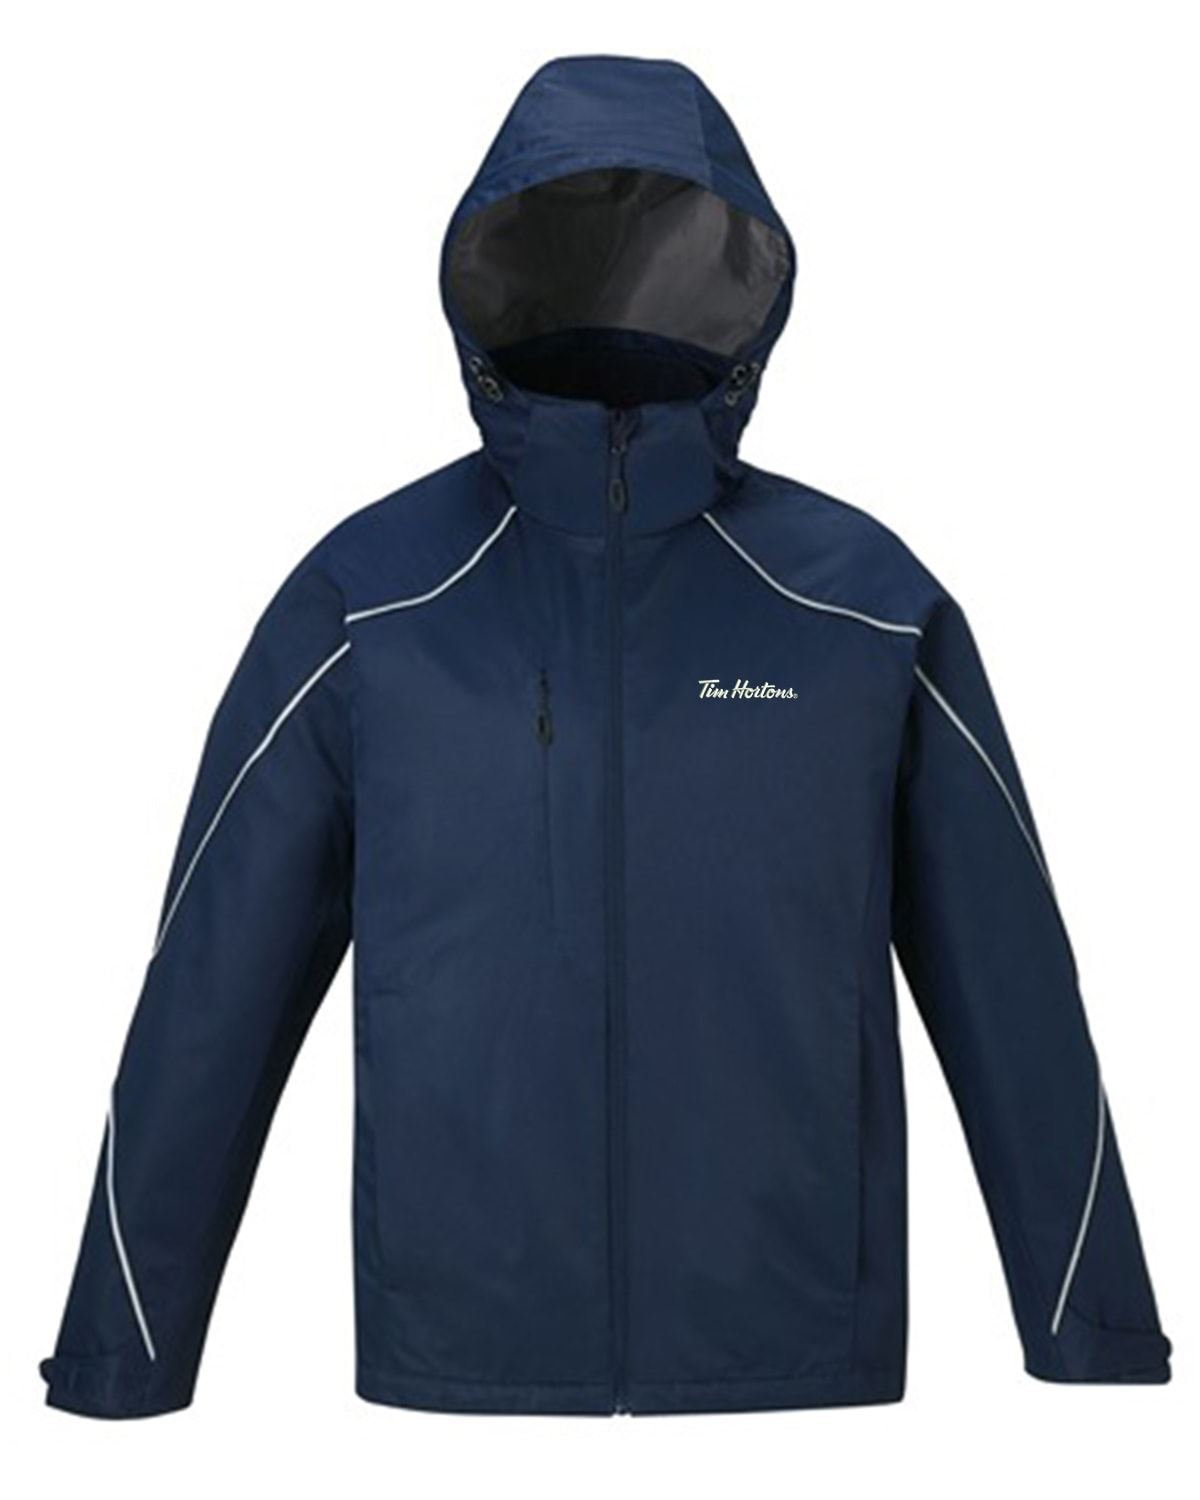 Tim Hortons Online Apparel. North End 3-in-1 Jacket with Bonded